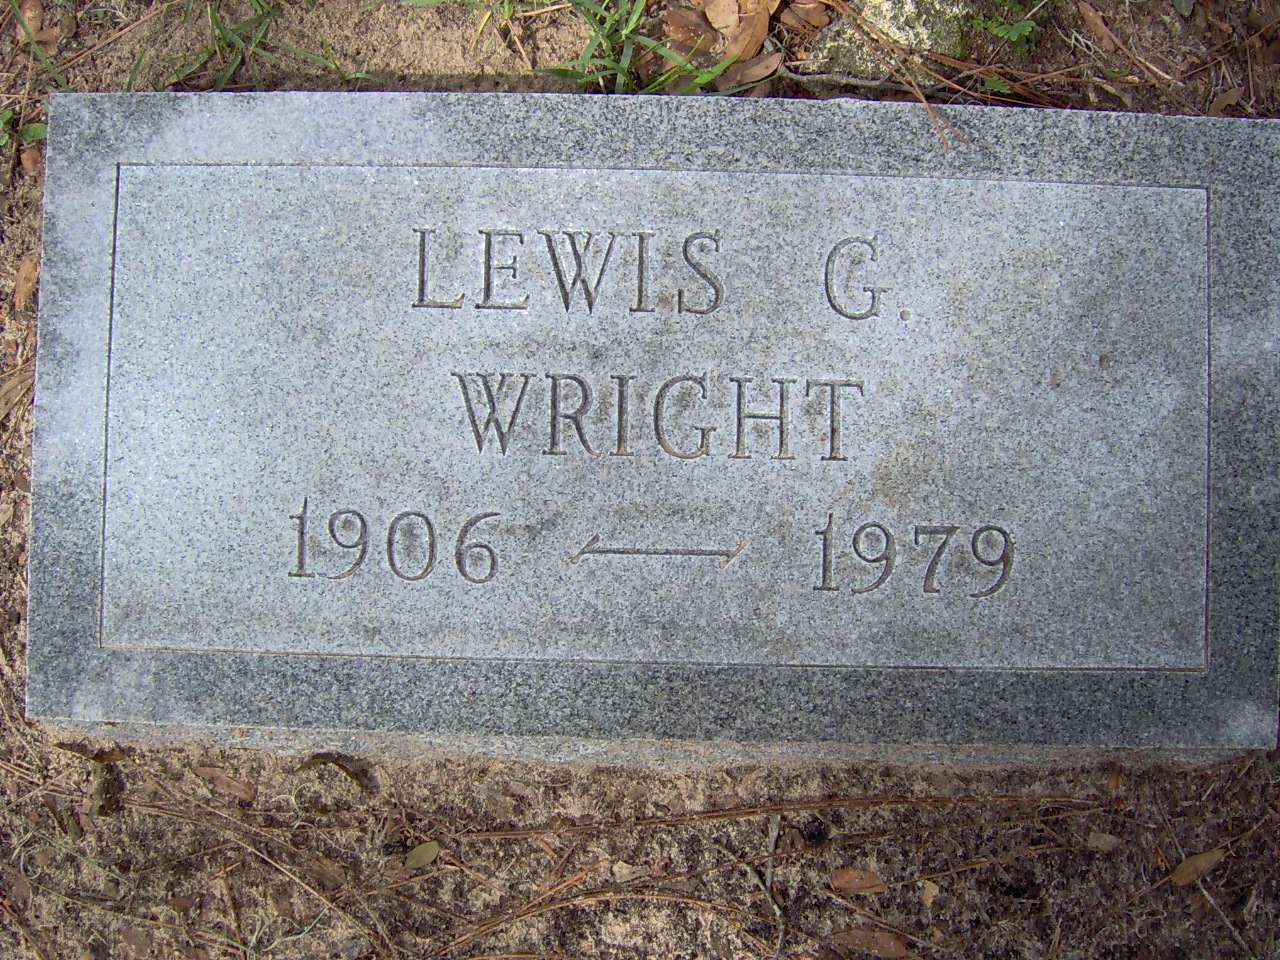 Headstone for Wright, Lewis G.